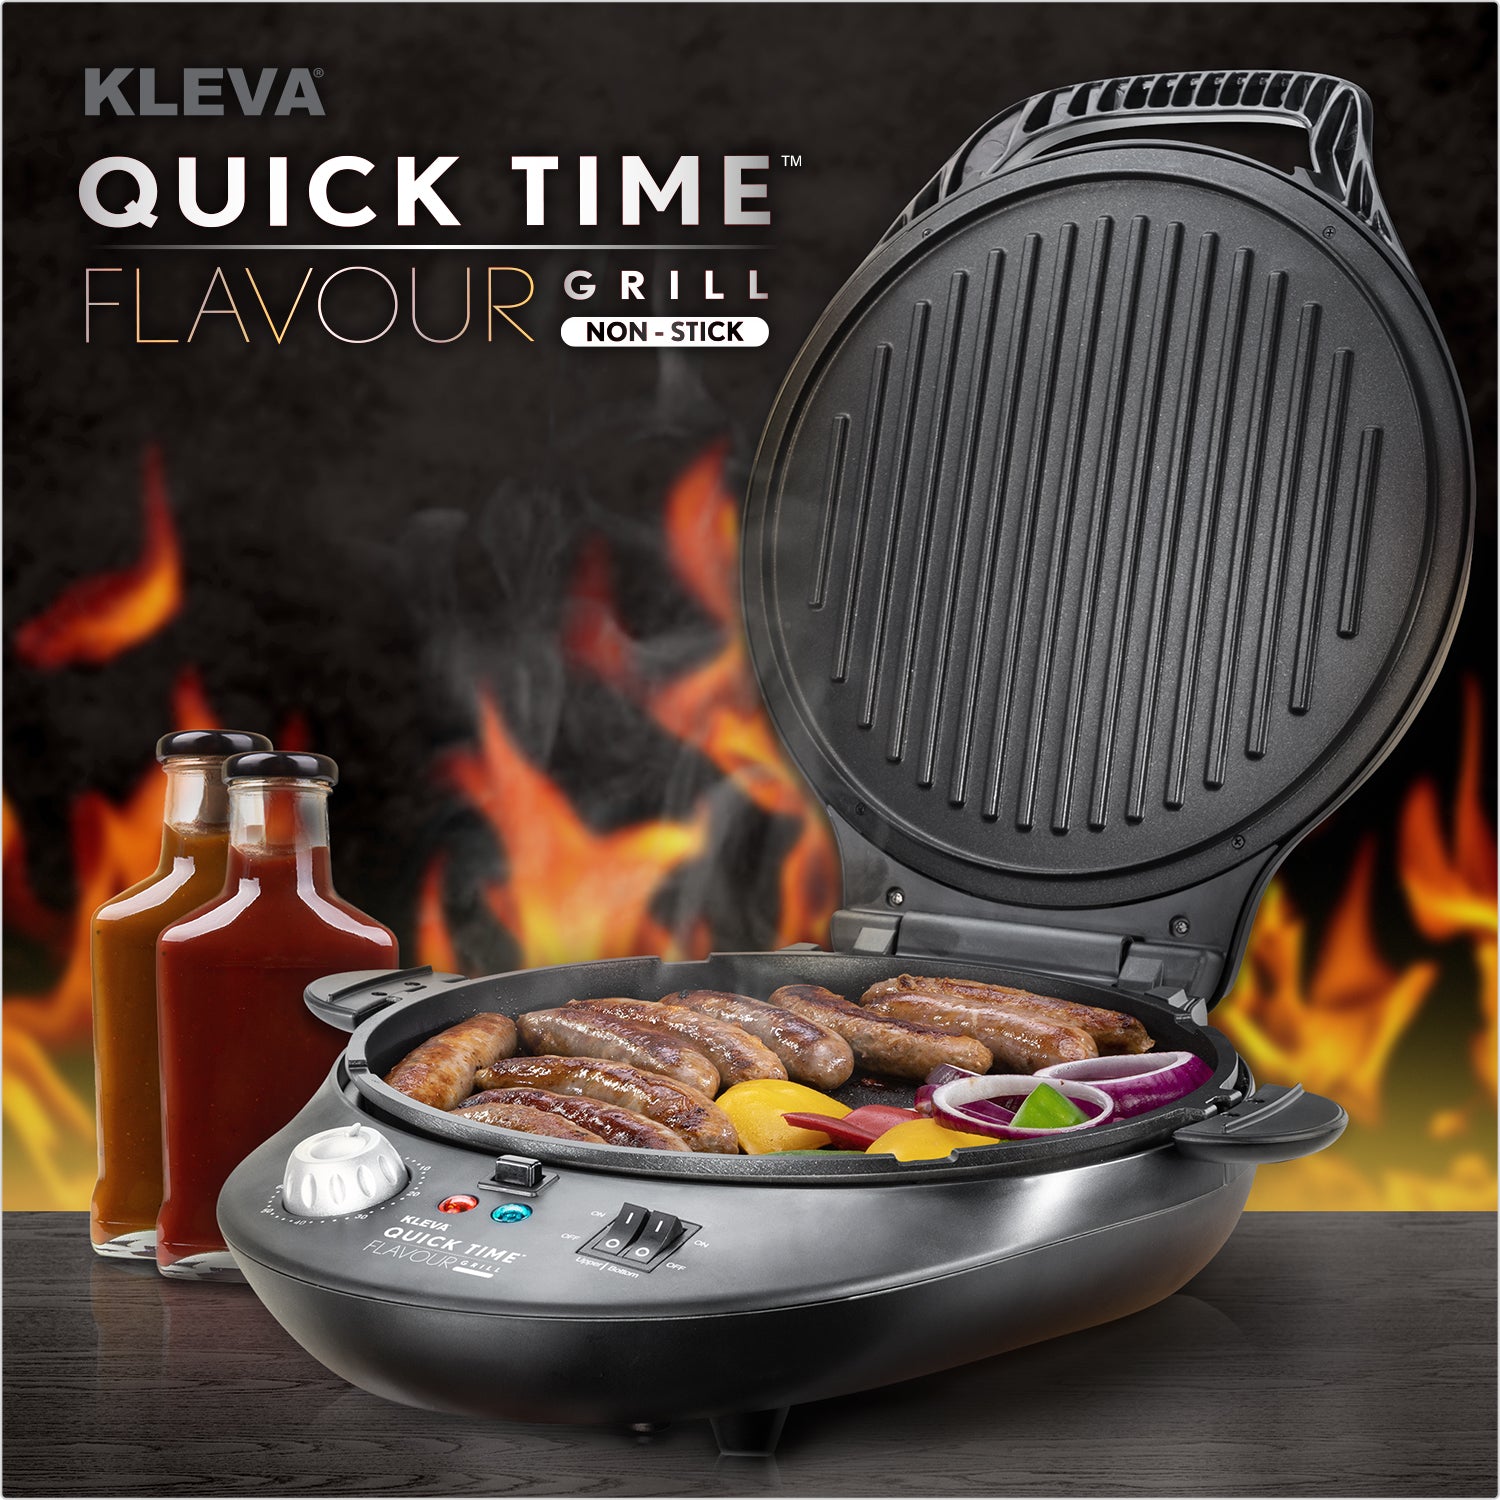 QuickTime Flavour Grill™ Superior Dual Heating & Removable Deep Pan Kitchen Appliance Kleva Range - Everyday Innovations   